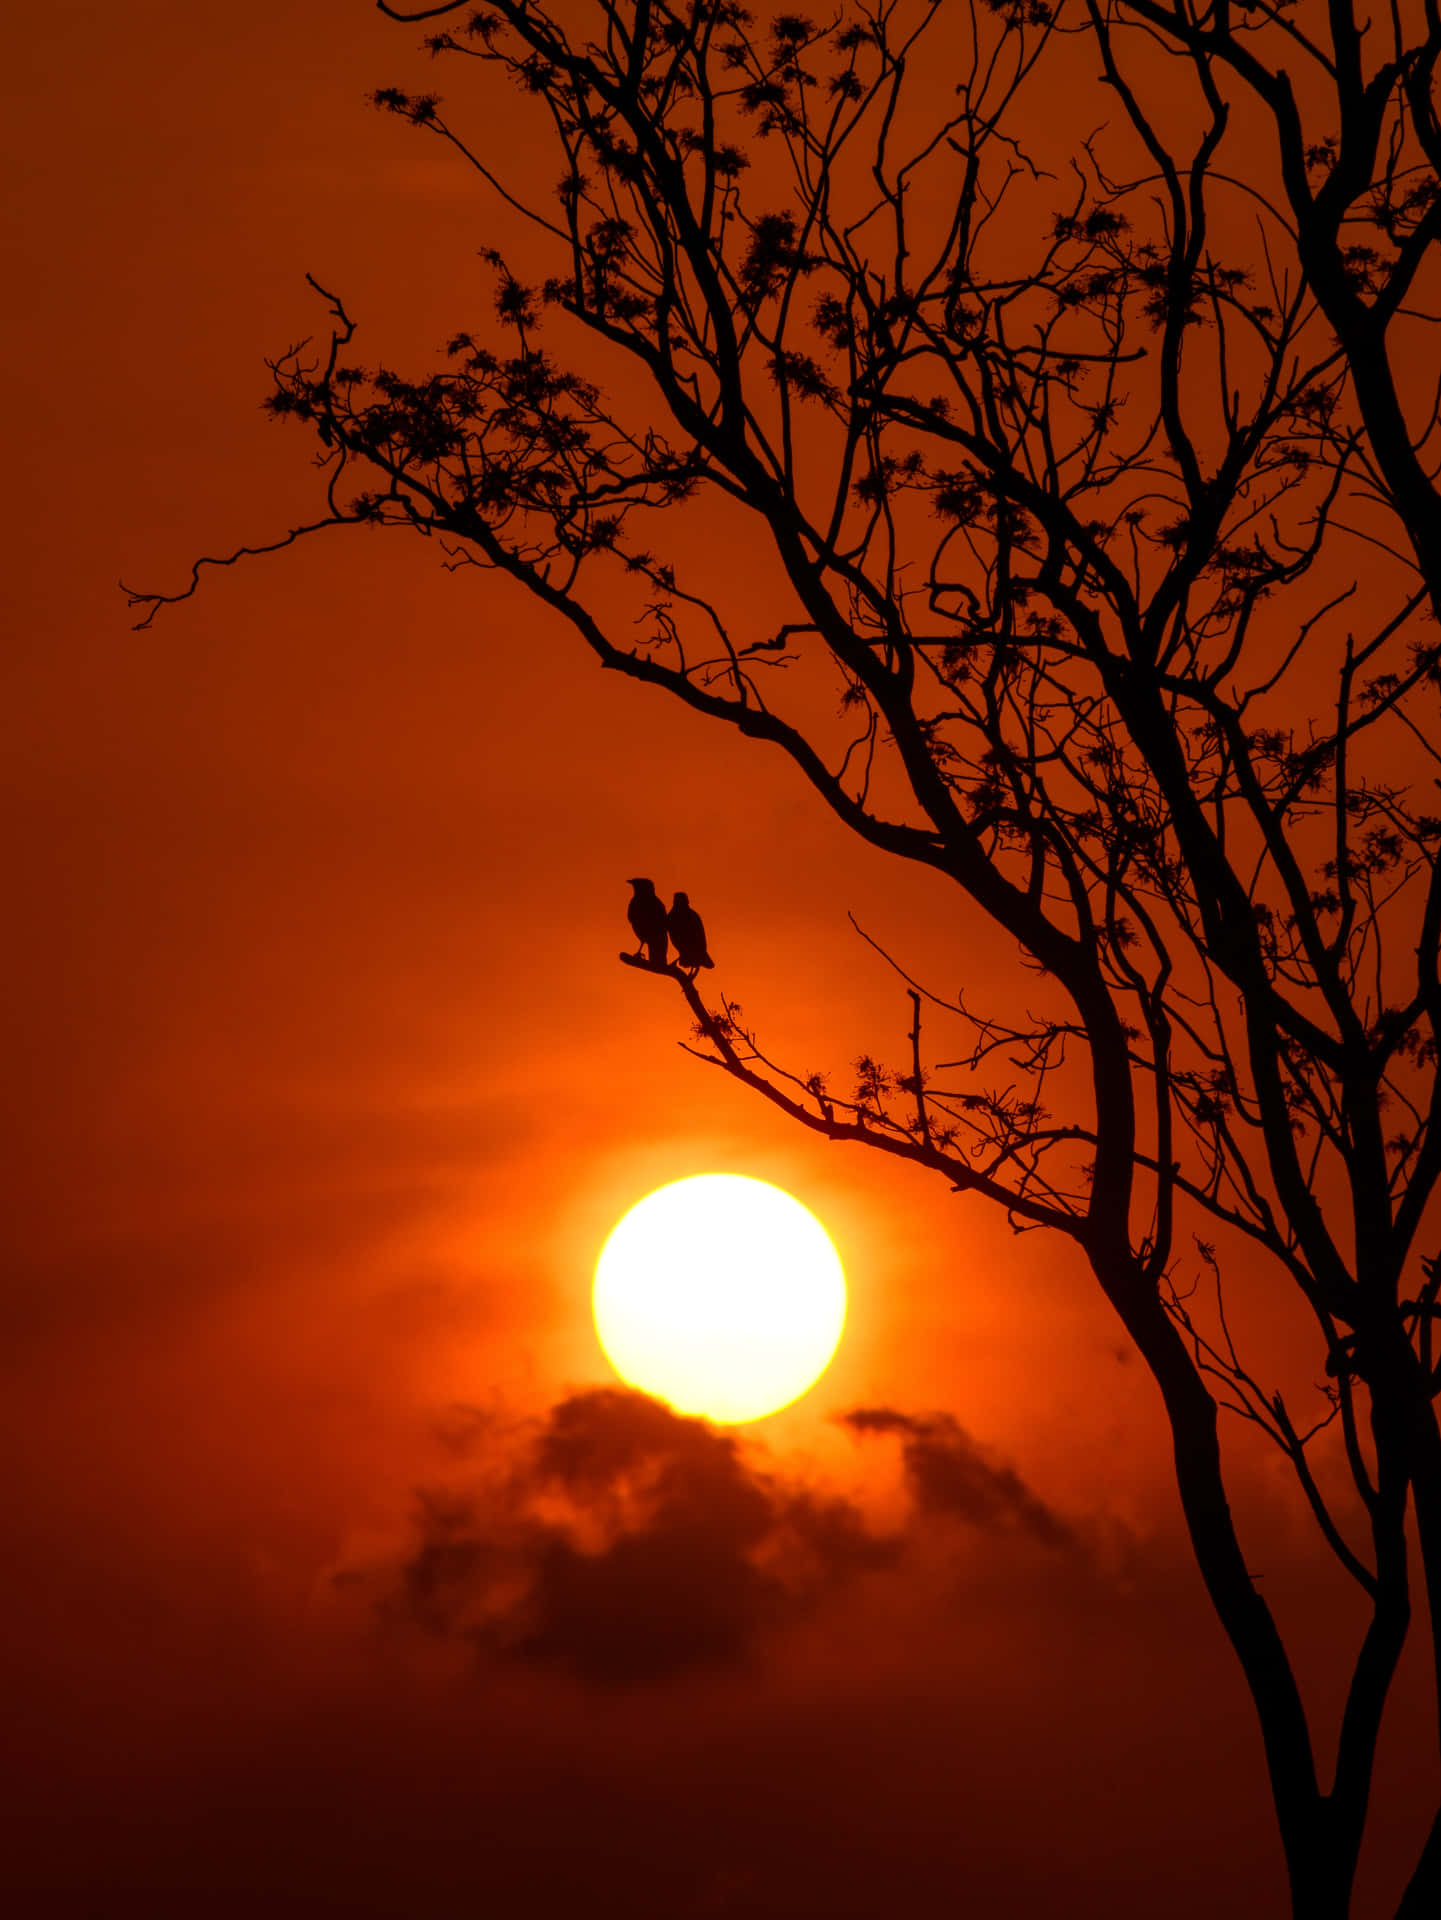 Leafless Tree Sunset Silhouette Pretty Nature Picture